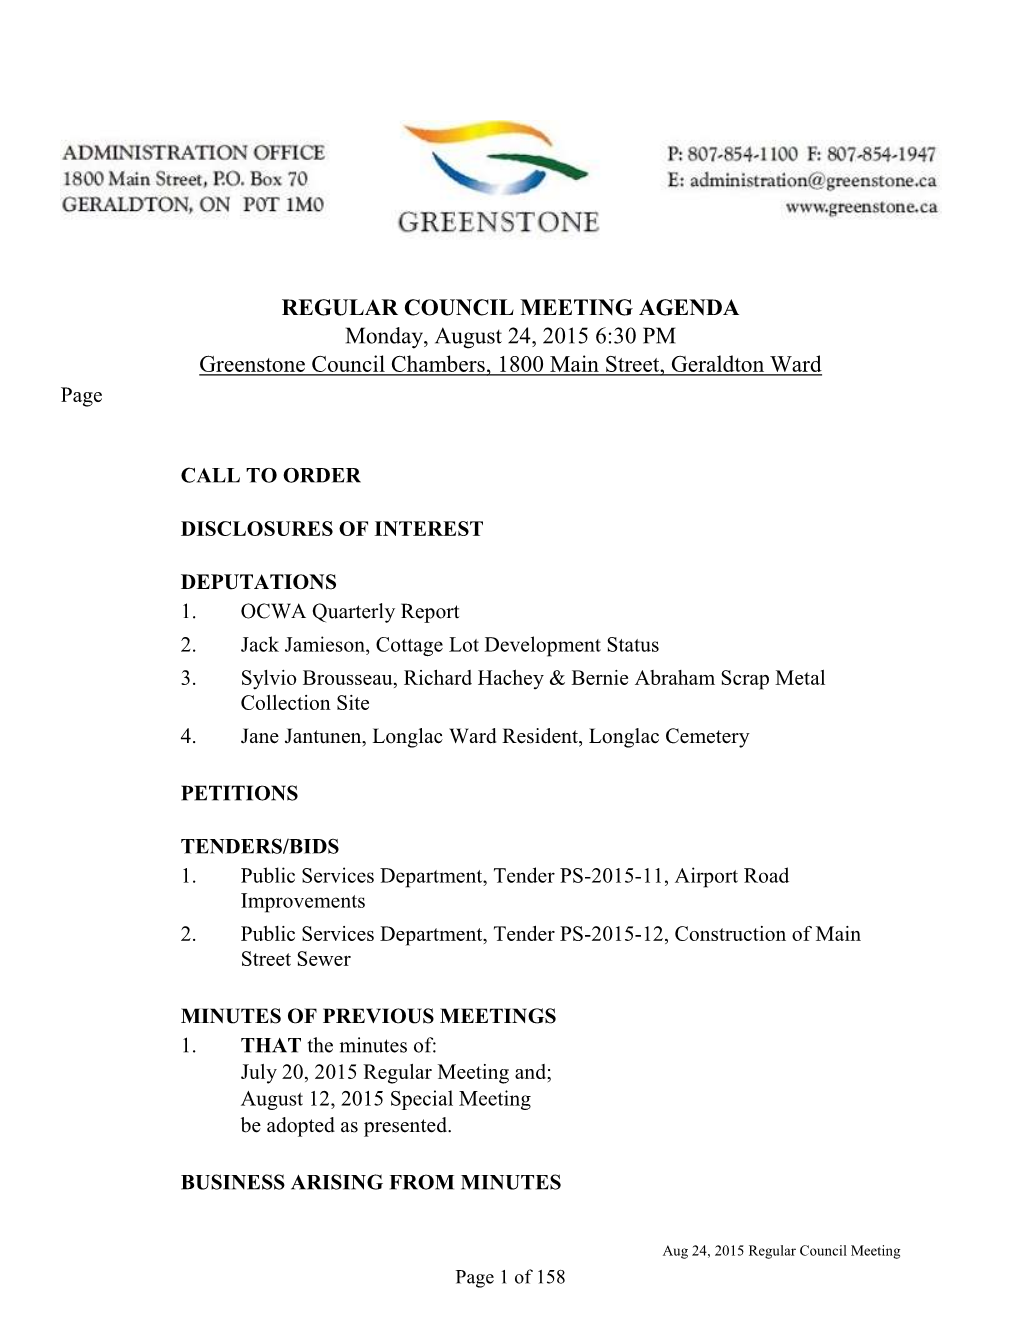 REGULAR COUNCIL MEETING AGENDA Monday, August 24, 2015 6:30 PM Greenstone Council Chambers, 1800 Main Street, Geraldton Ward Page